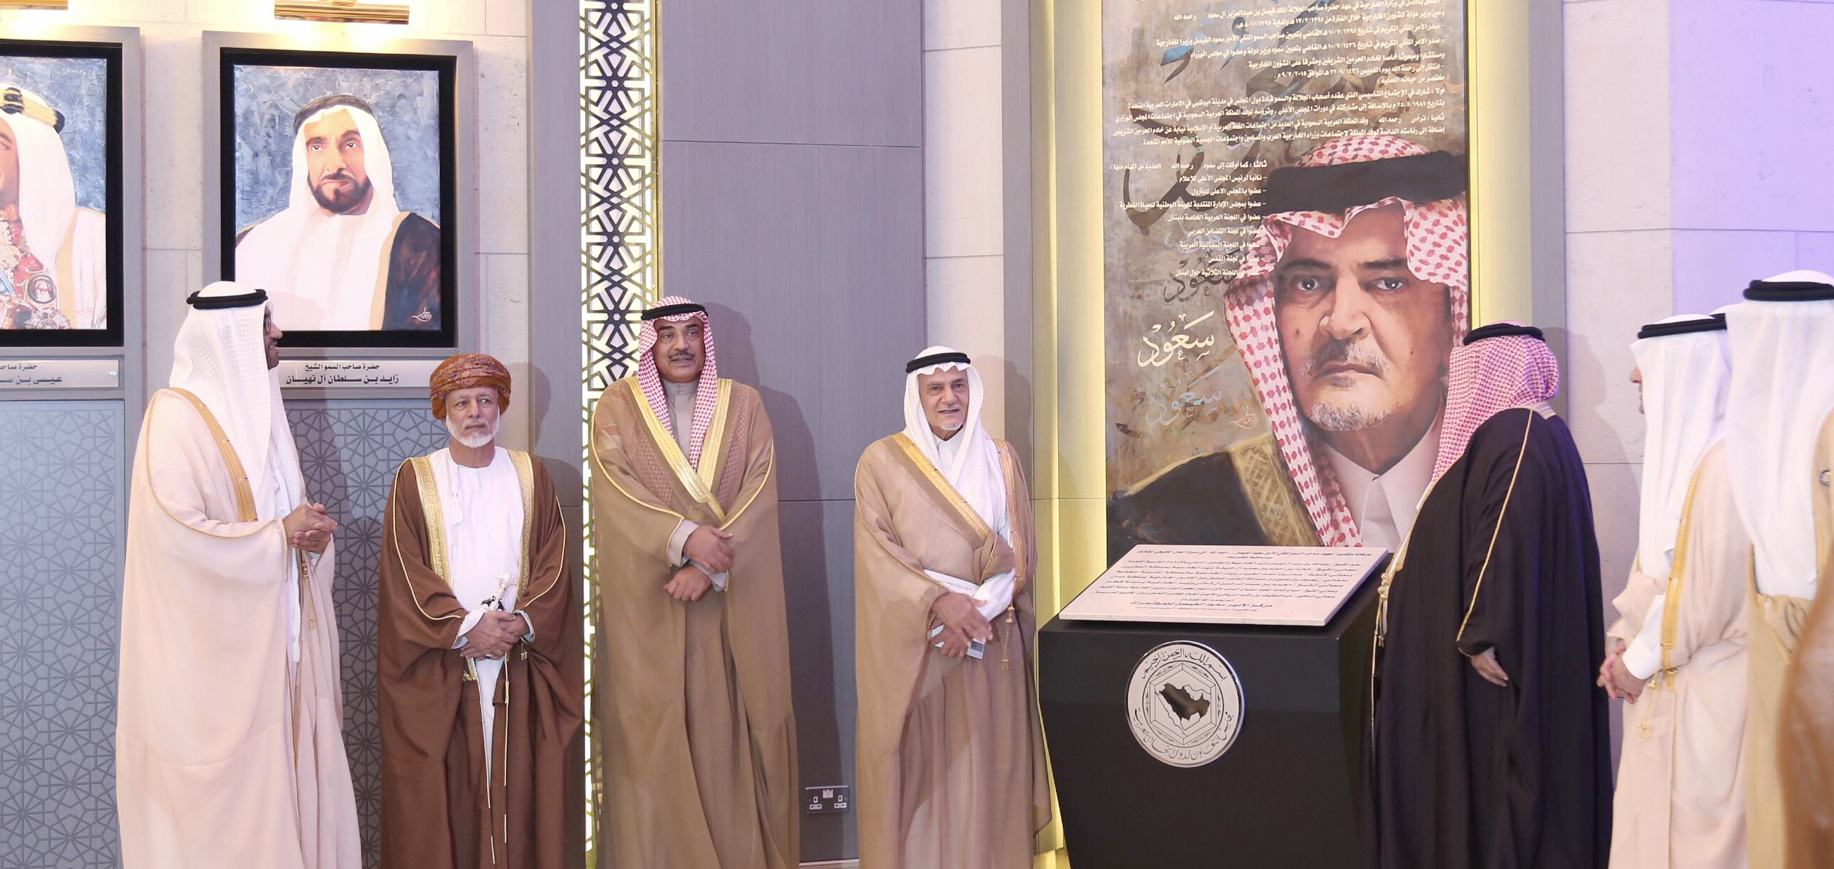 First Deputy Prime Minister and Minister of Foreign Affairs Sheikh Sabah Al-Khaled Al--Hamad Al- Sabah during the inauguration ceremony of Prince Saud Al-Faisal Conference Center